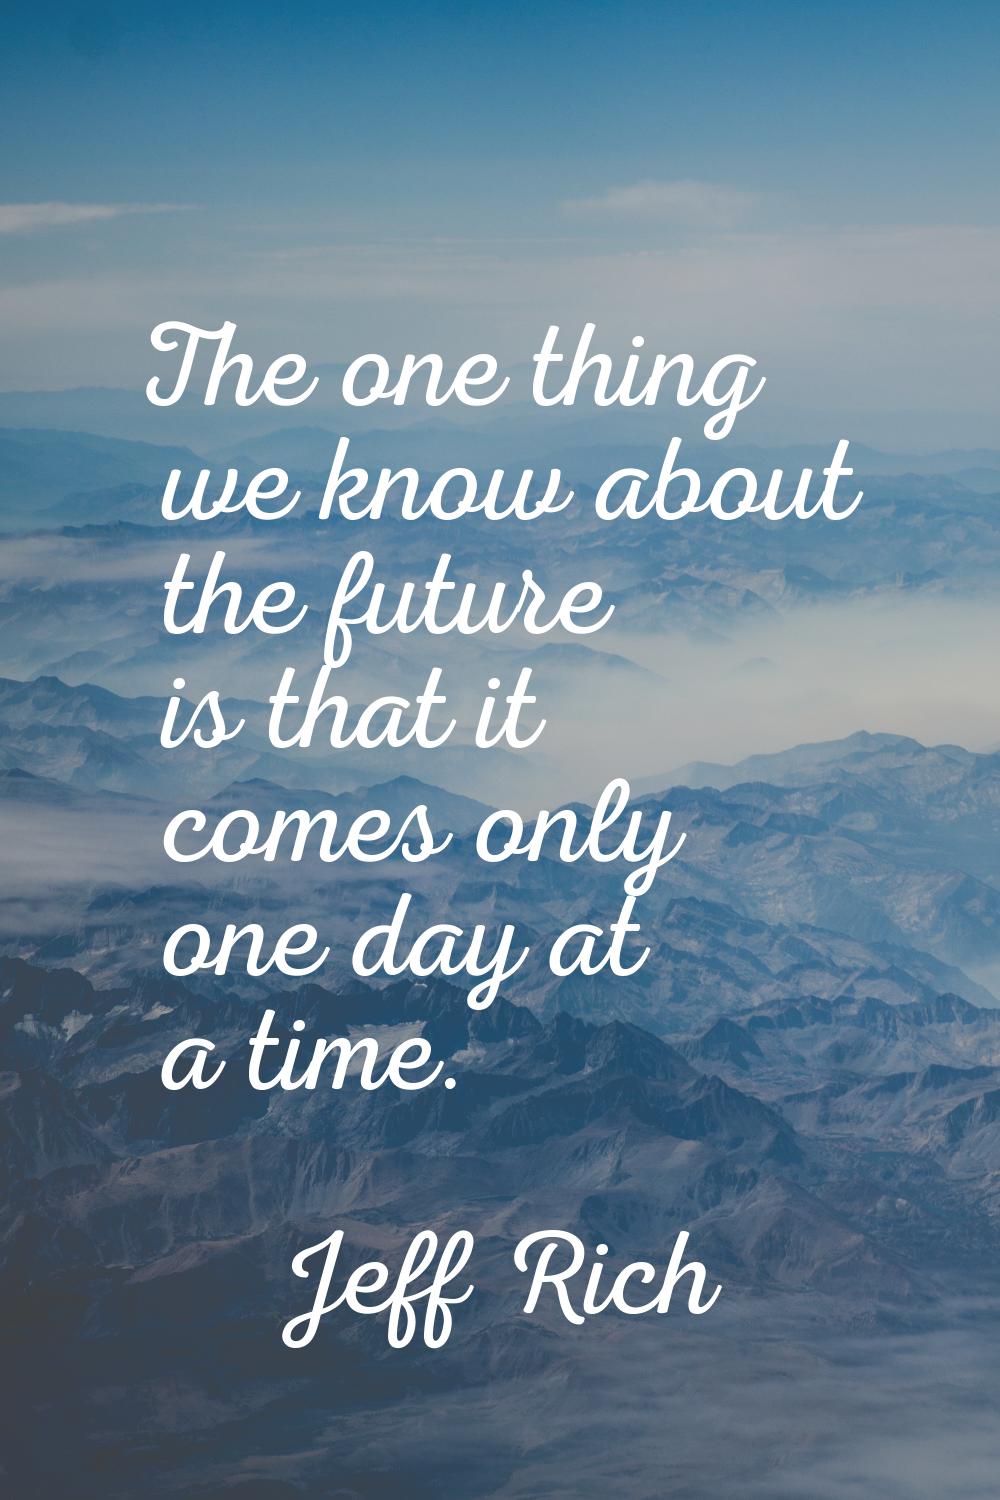 The one thing we know about the future is that it comes only one day at a time.